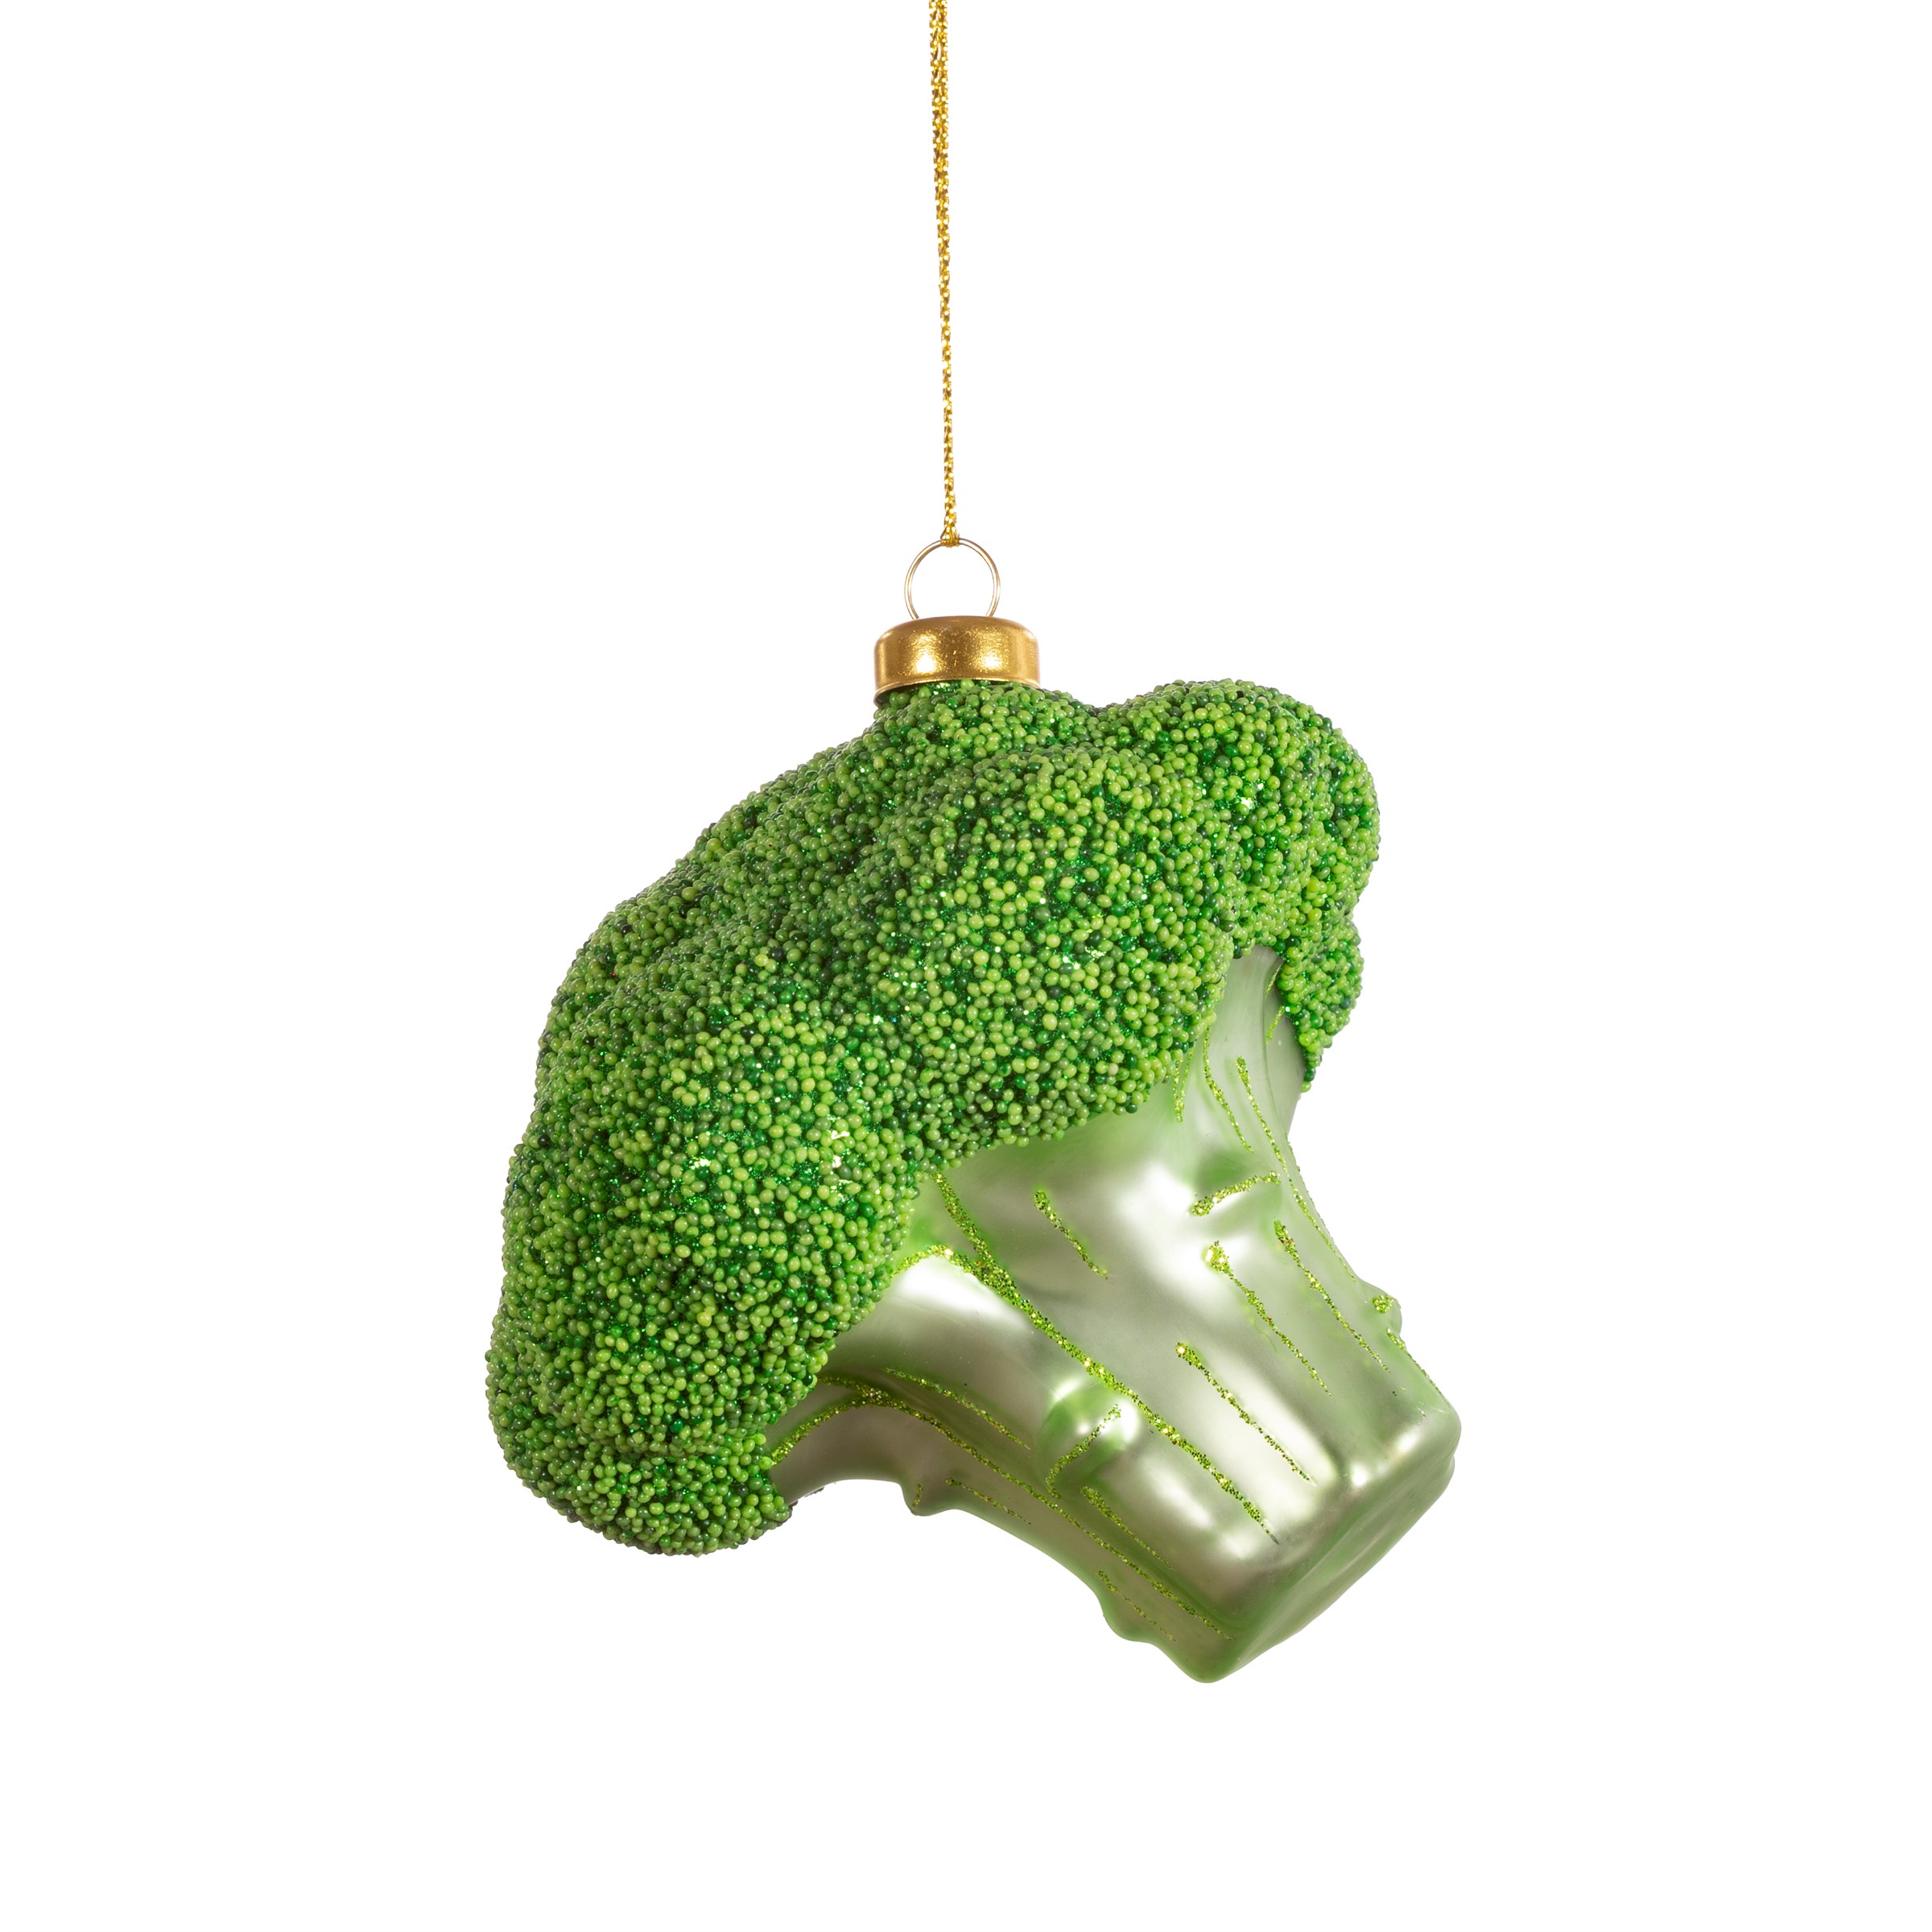 &Quirky Broccoli Shaped Bauble